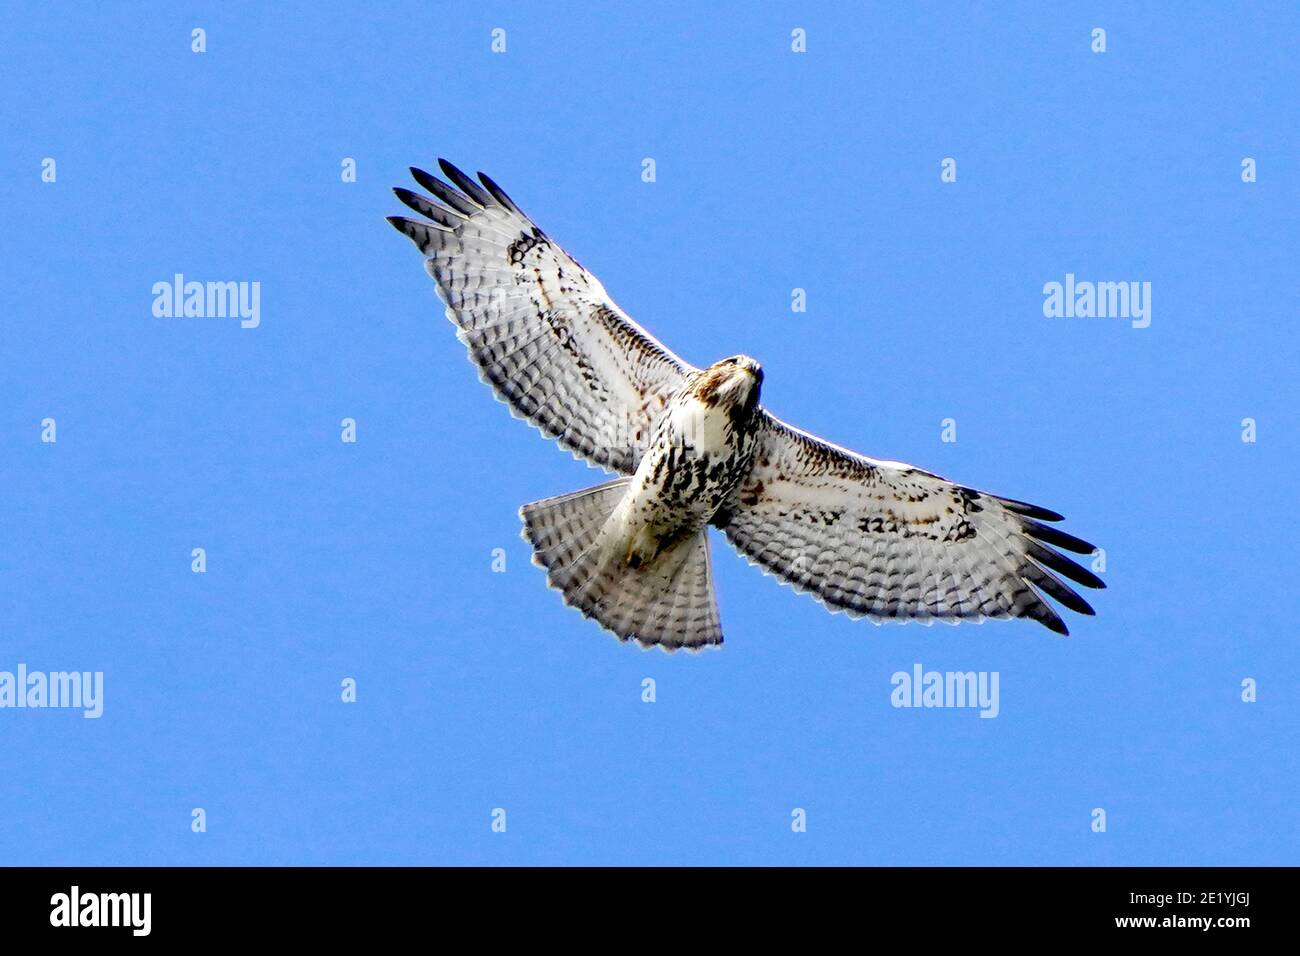 Red Tailed Hawk flying on bright blue winter sky Stock Photo